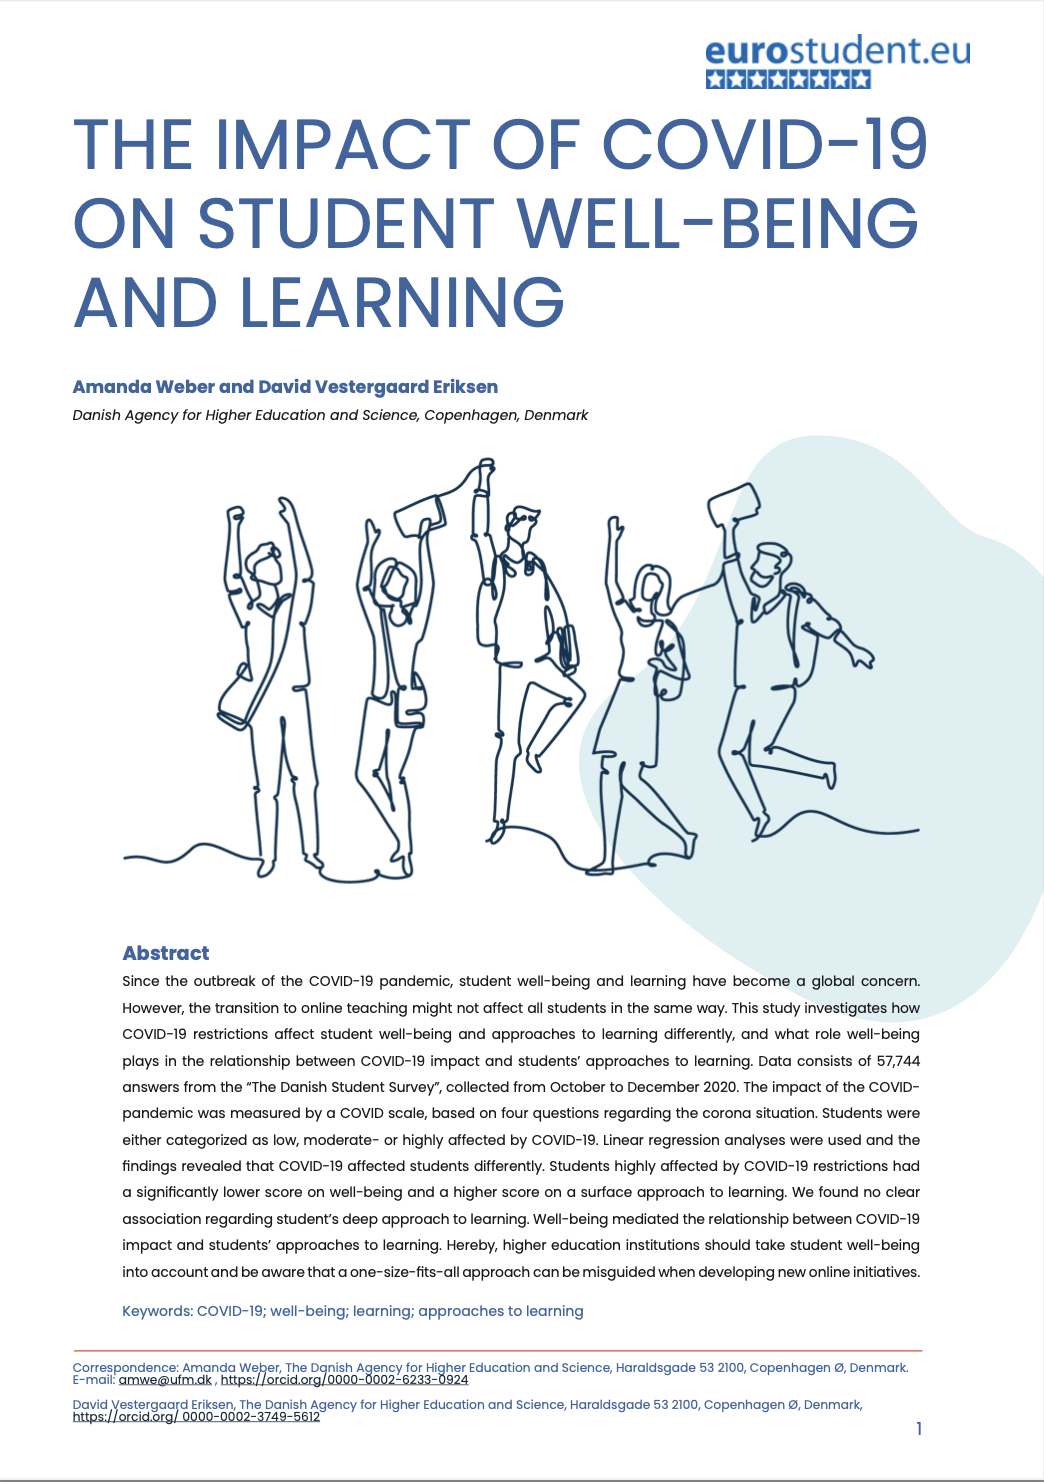 The impact of COVID-19 on student well-being and learning